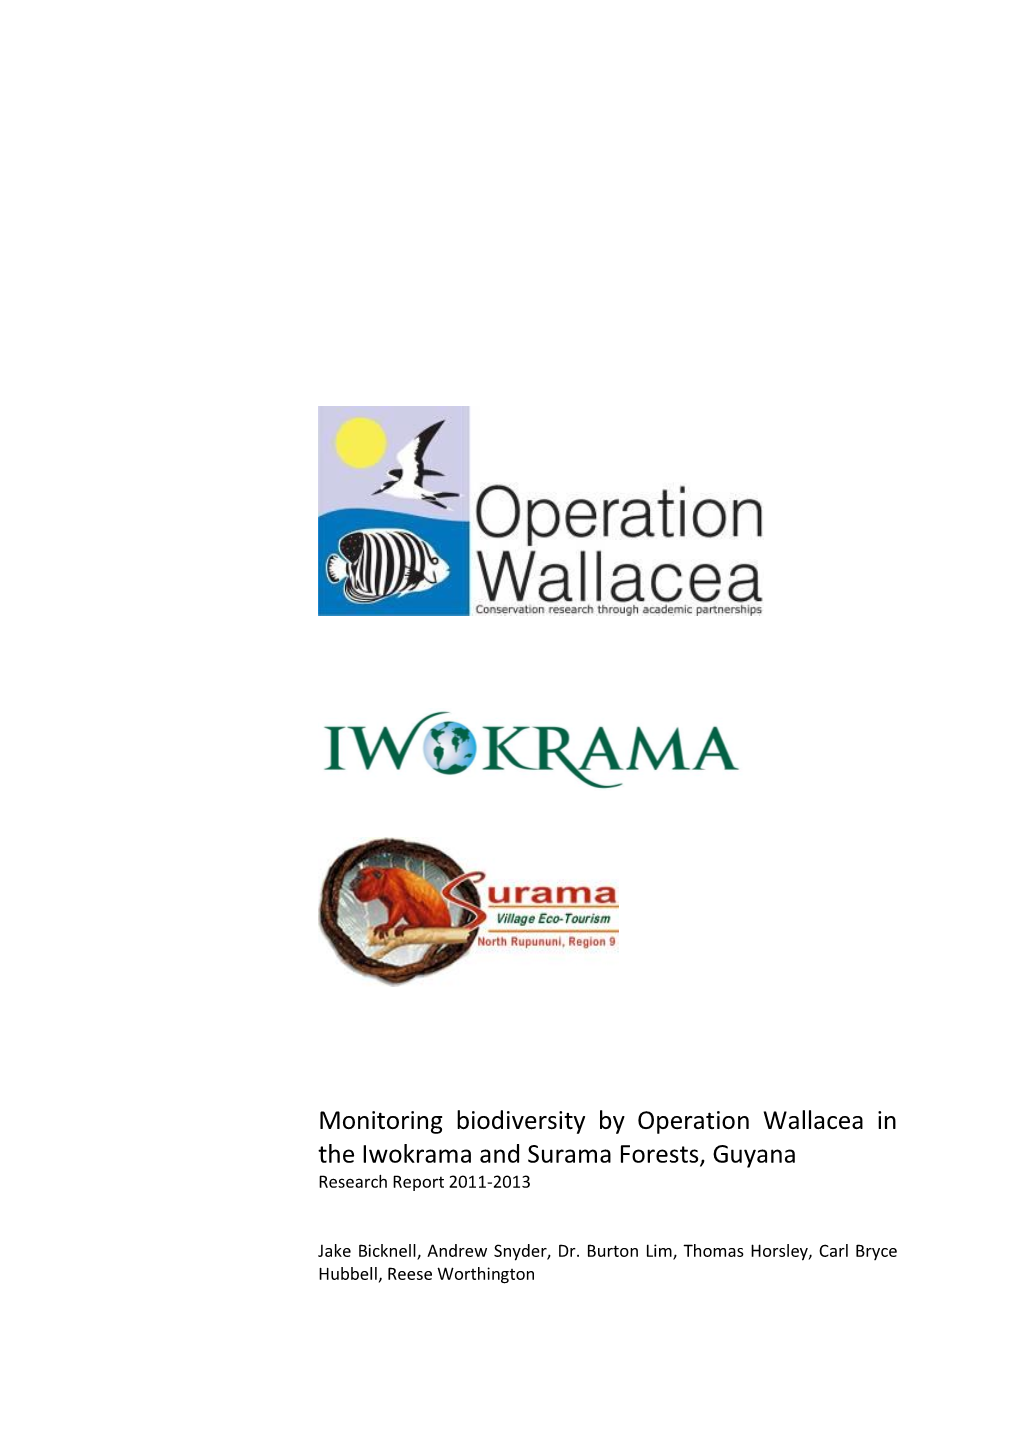 Monitoring Biodiversity by Operation Wallacea in the Iwokrama and Surama Forests, Guyana Research Report 2011-2013